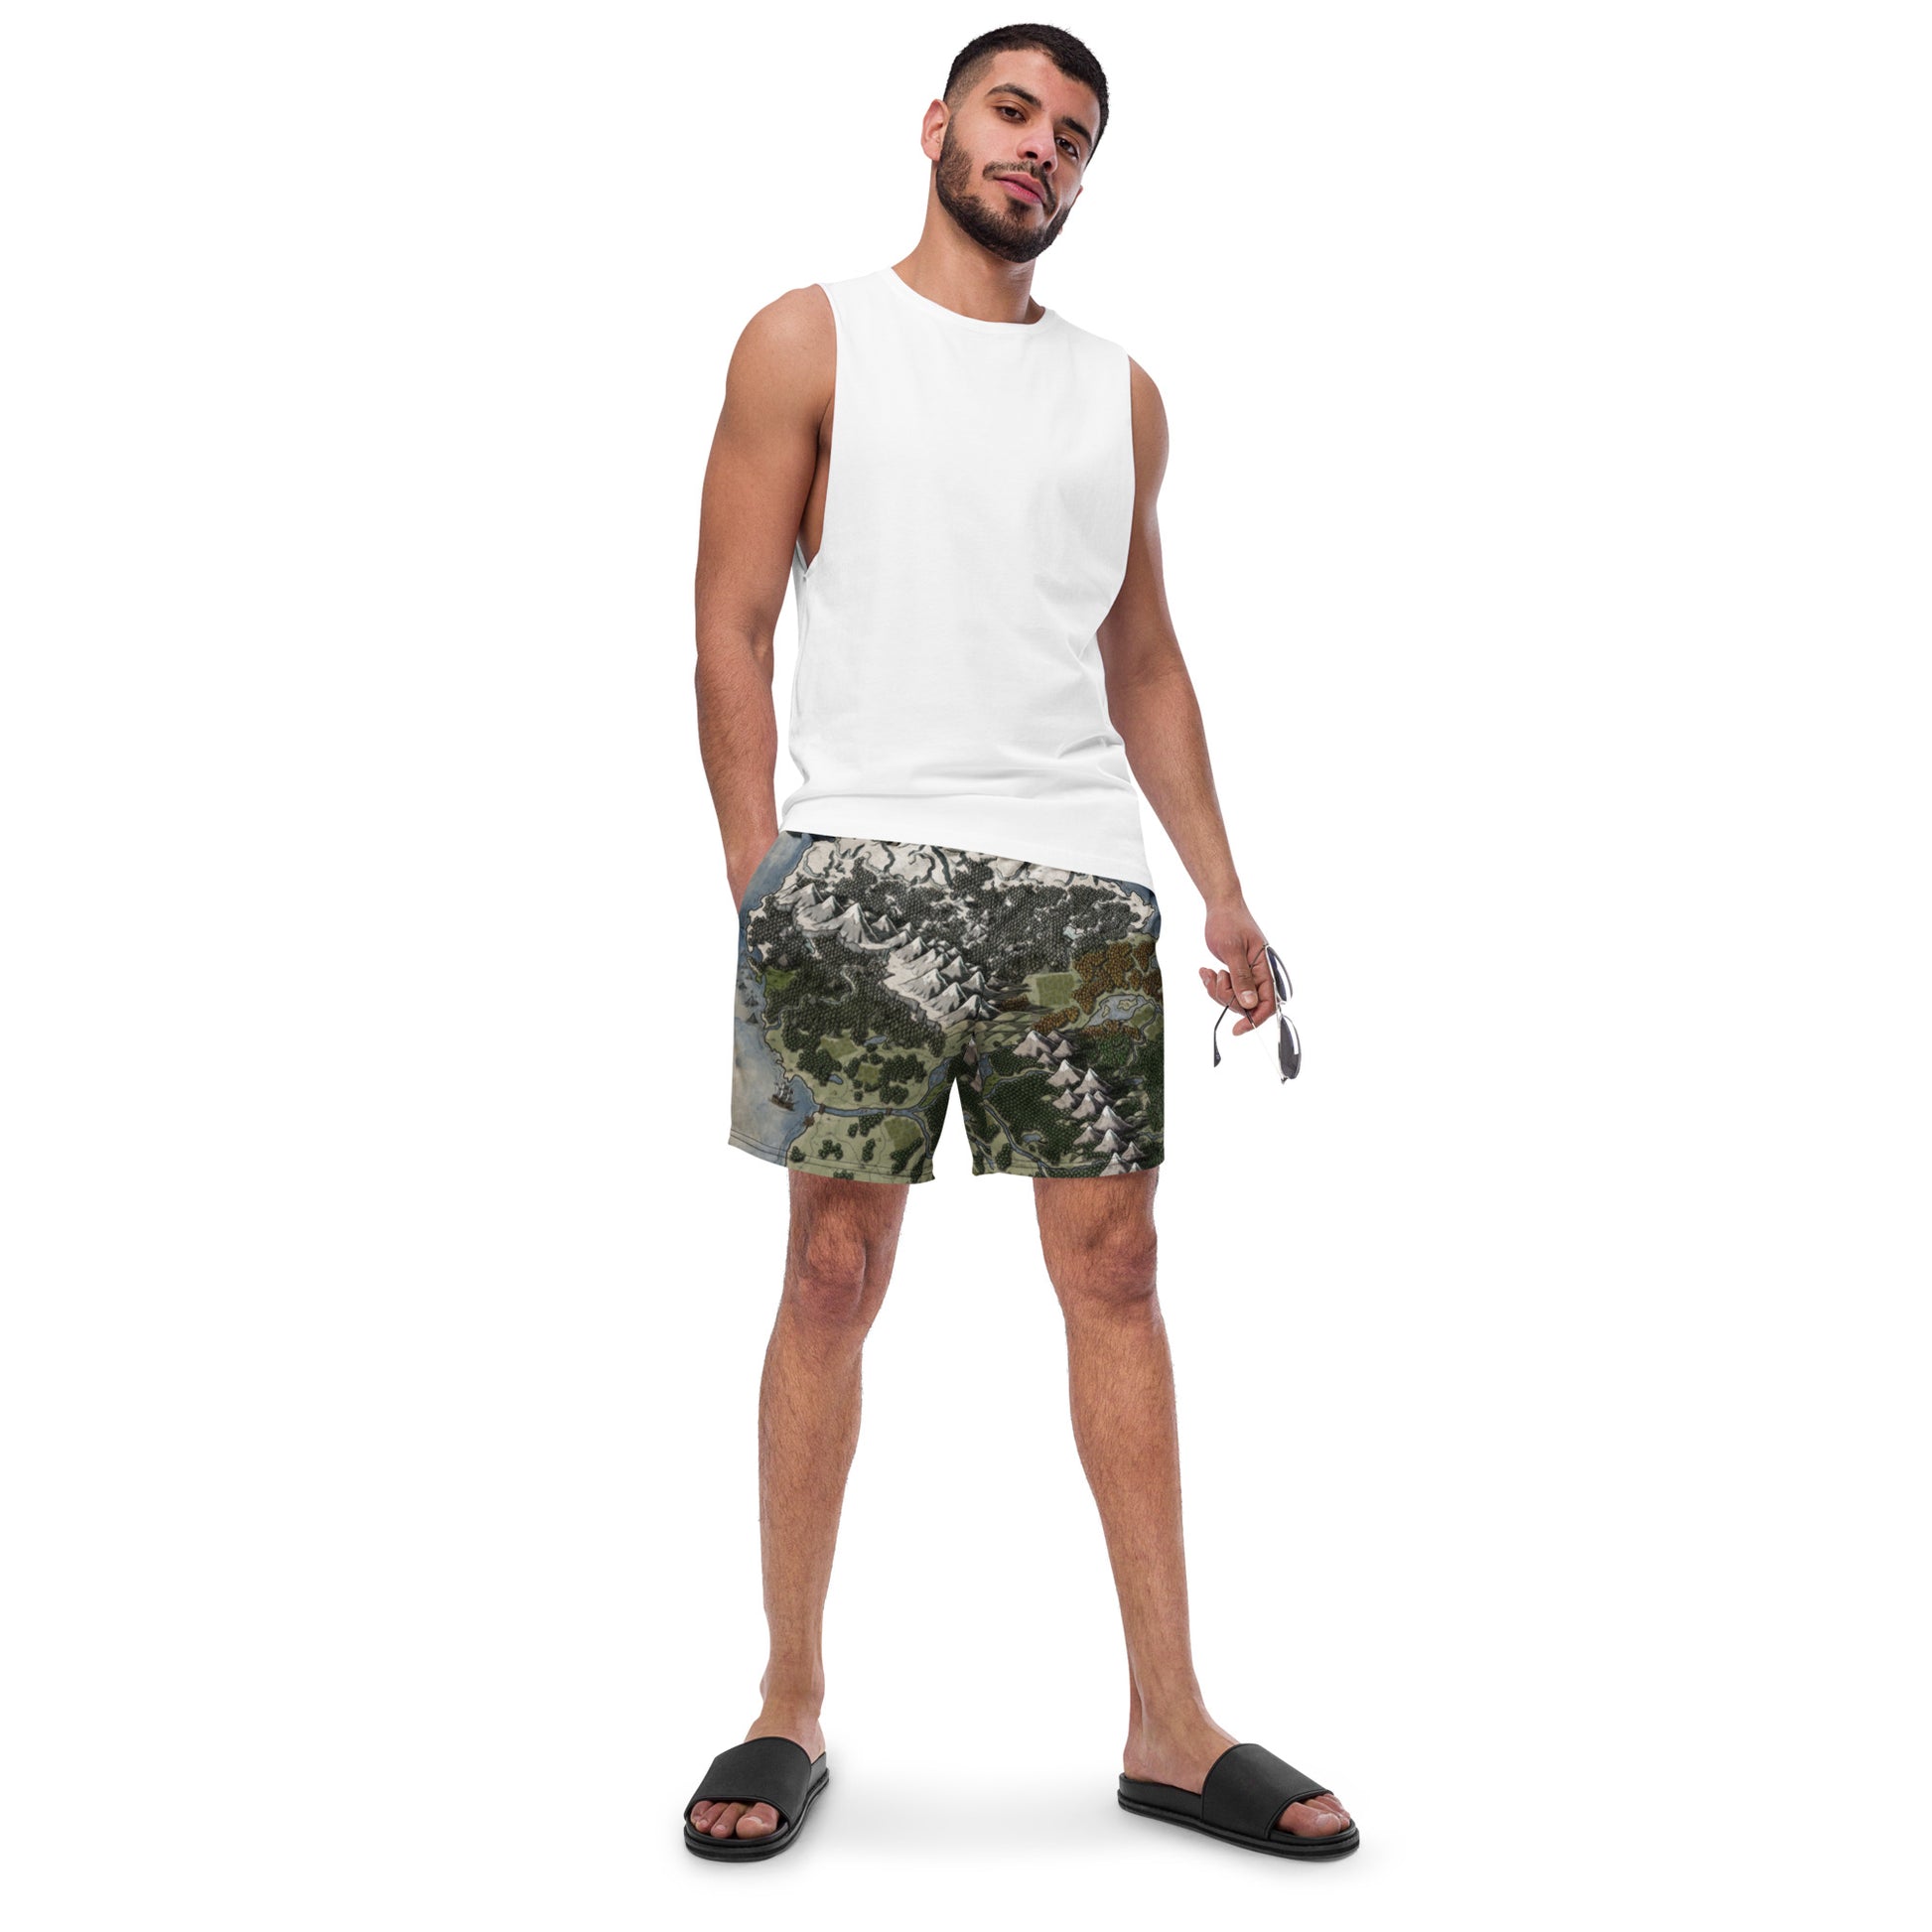 A model wears the Vendras map by Deven Rue on swim trunks with a tank top and sandals.